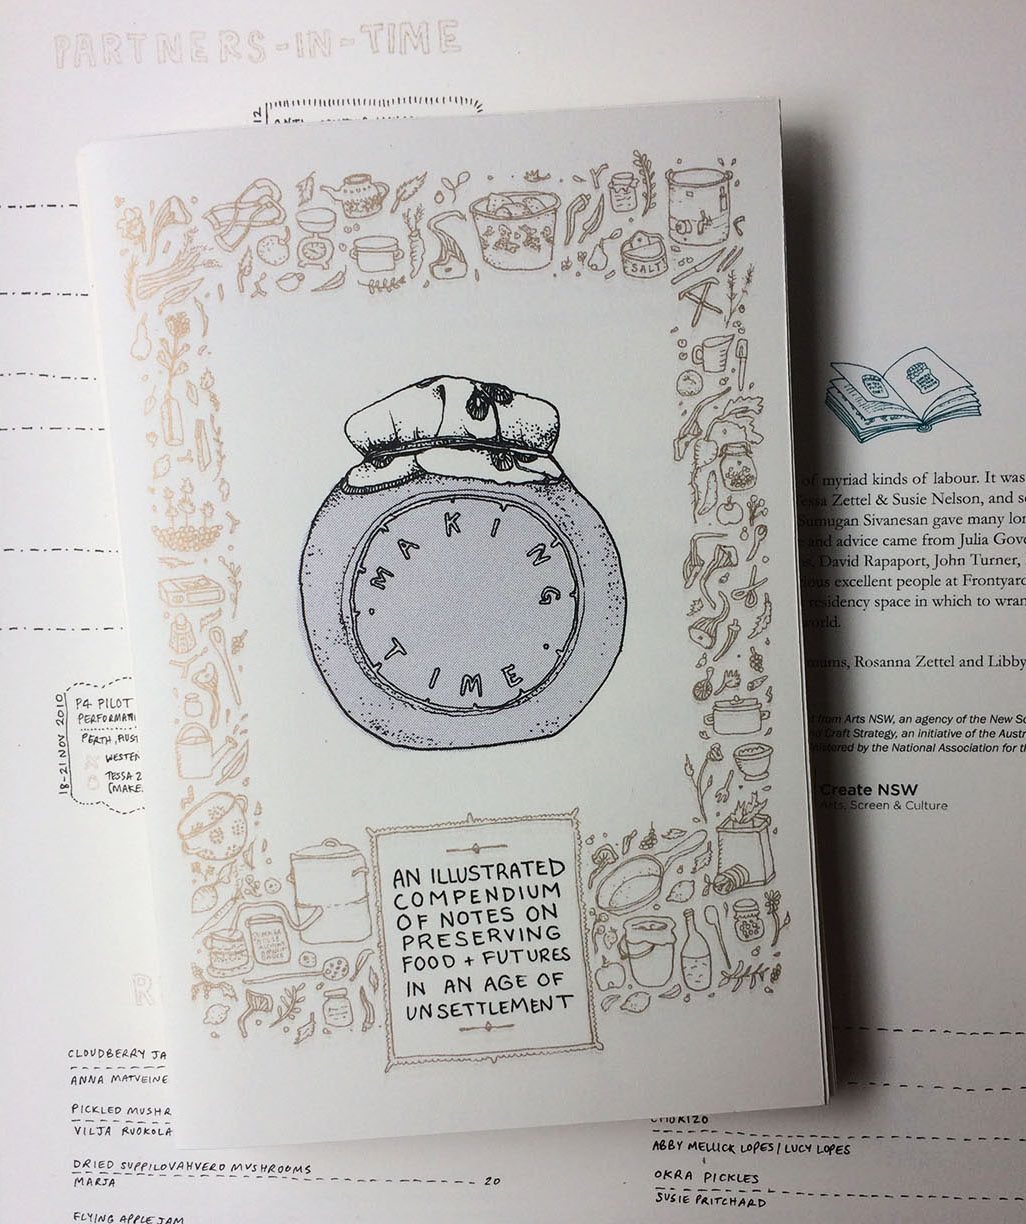 'Making Time: An Illustrated Compendium of Notes on Preserving Food & Futures in an Age of Unsettlement', Tessa Zettel & Susie Nelson (2017)